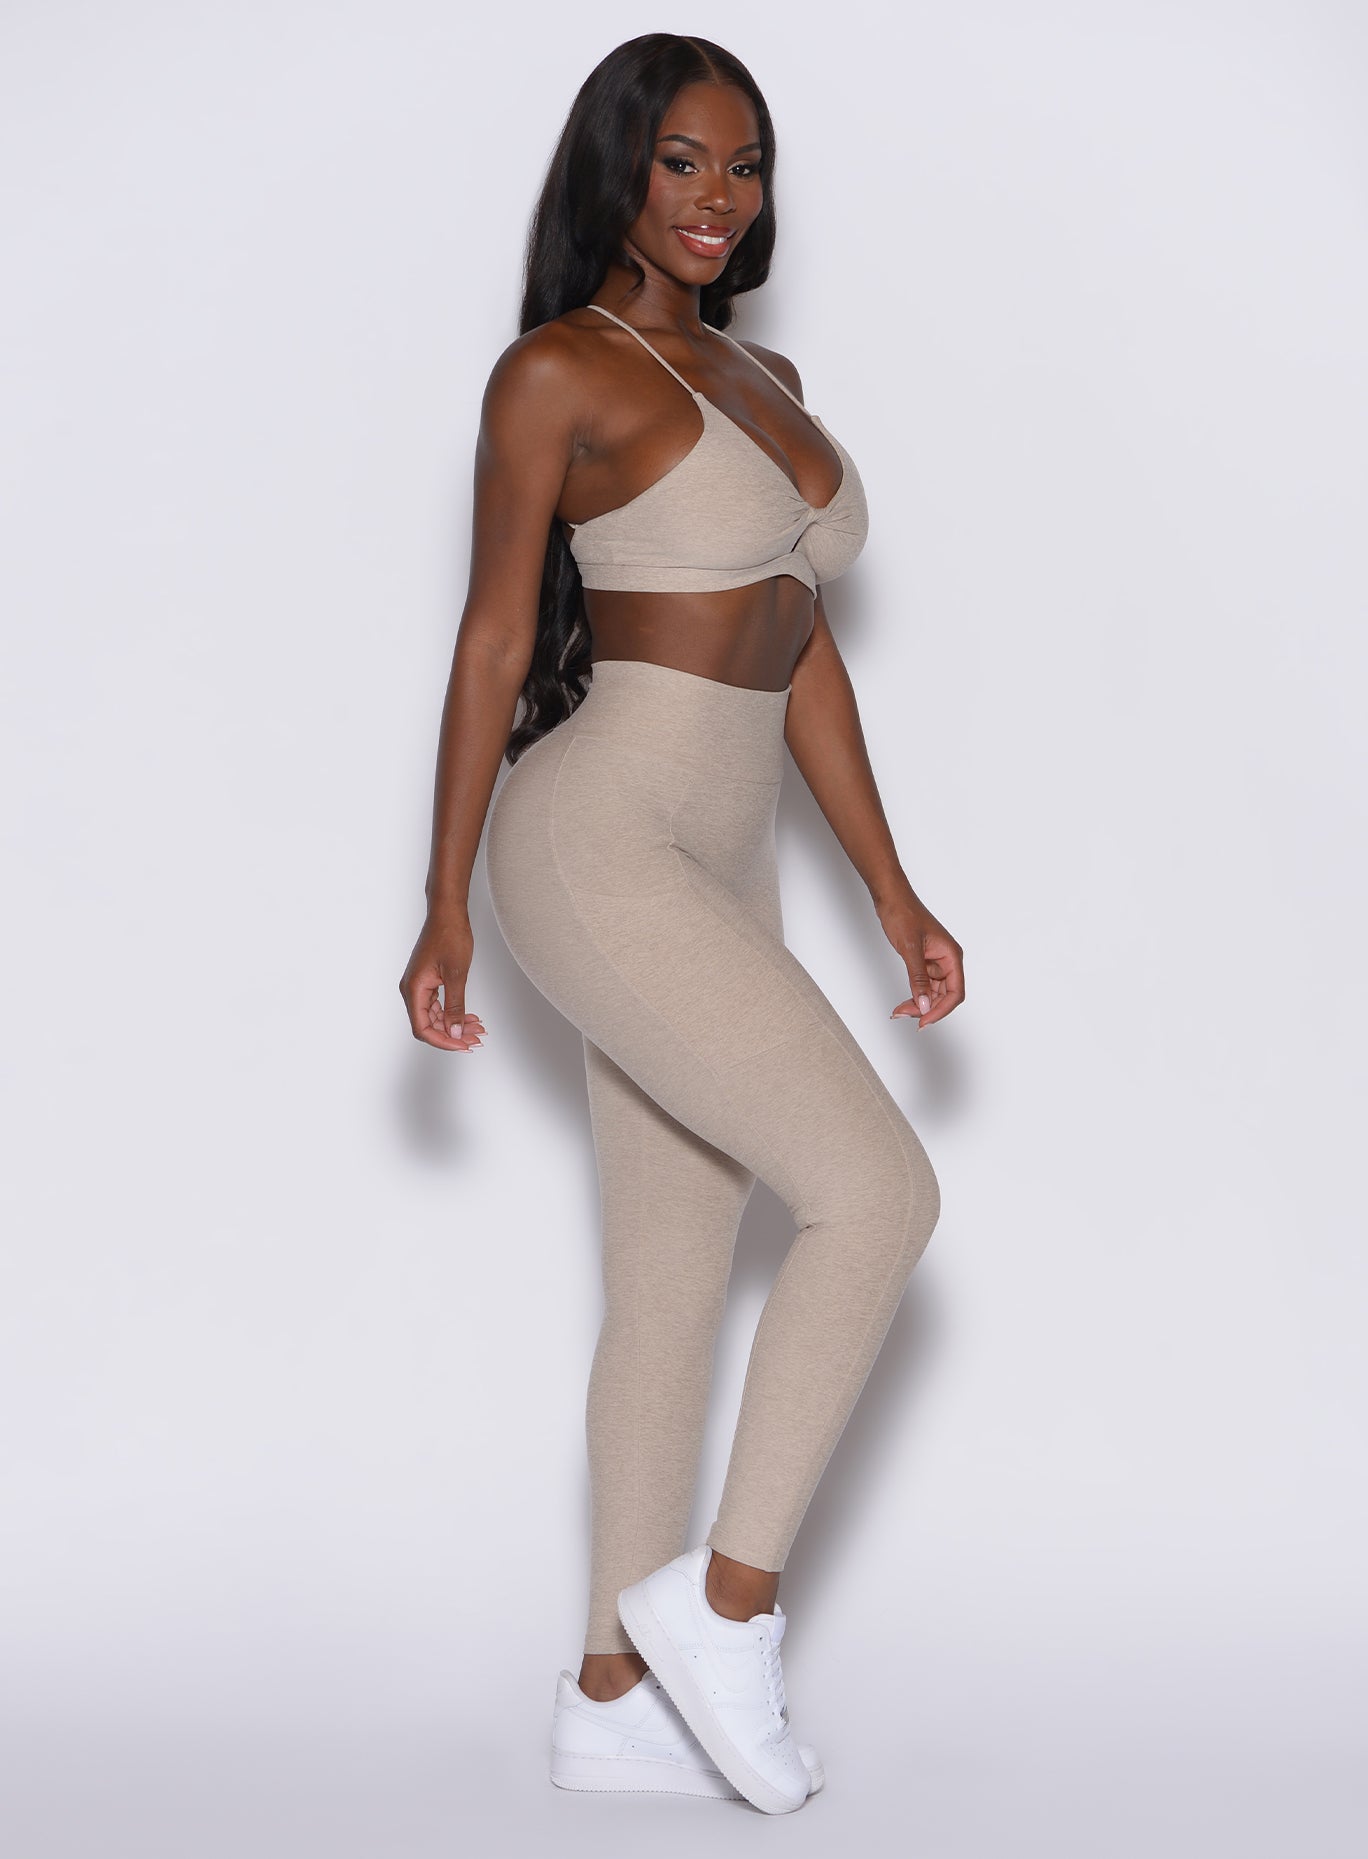 right side profile view of a model wearing our Curves leggings in taupe color, paired with the matching sports bra.